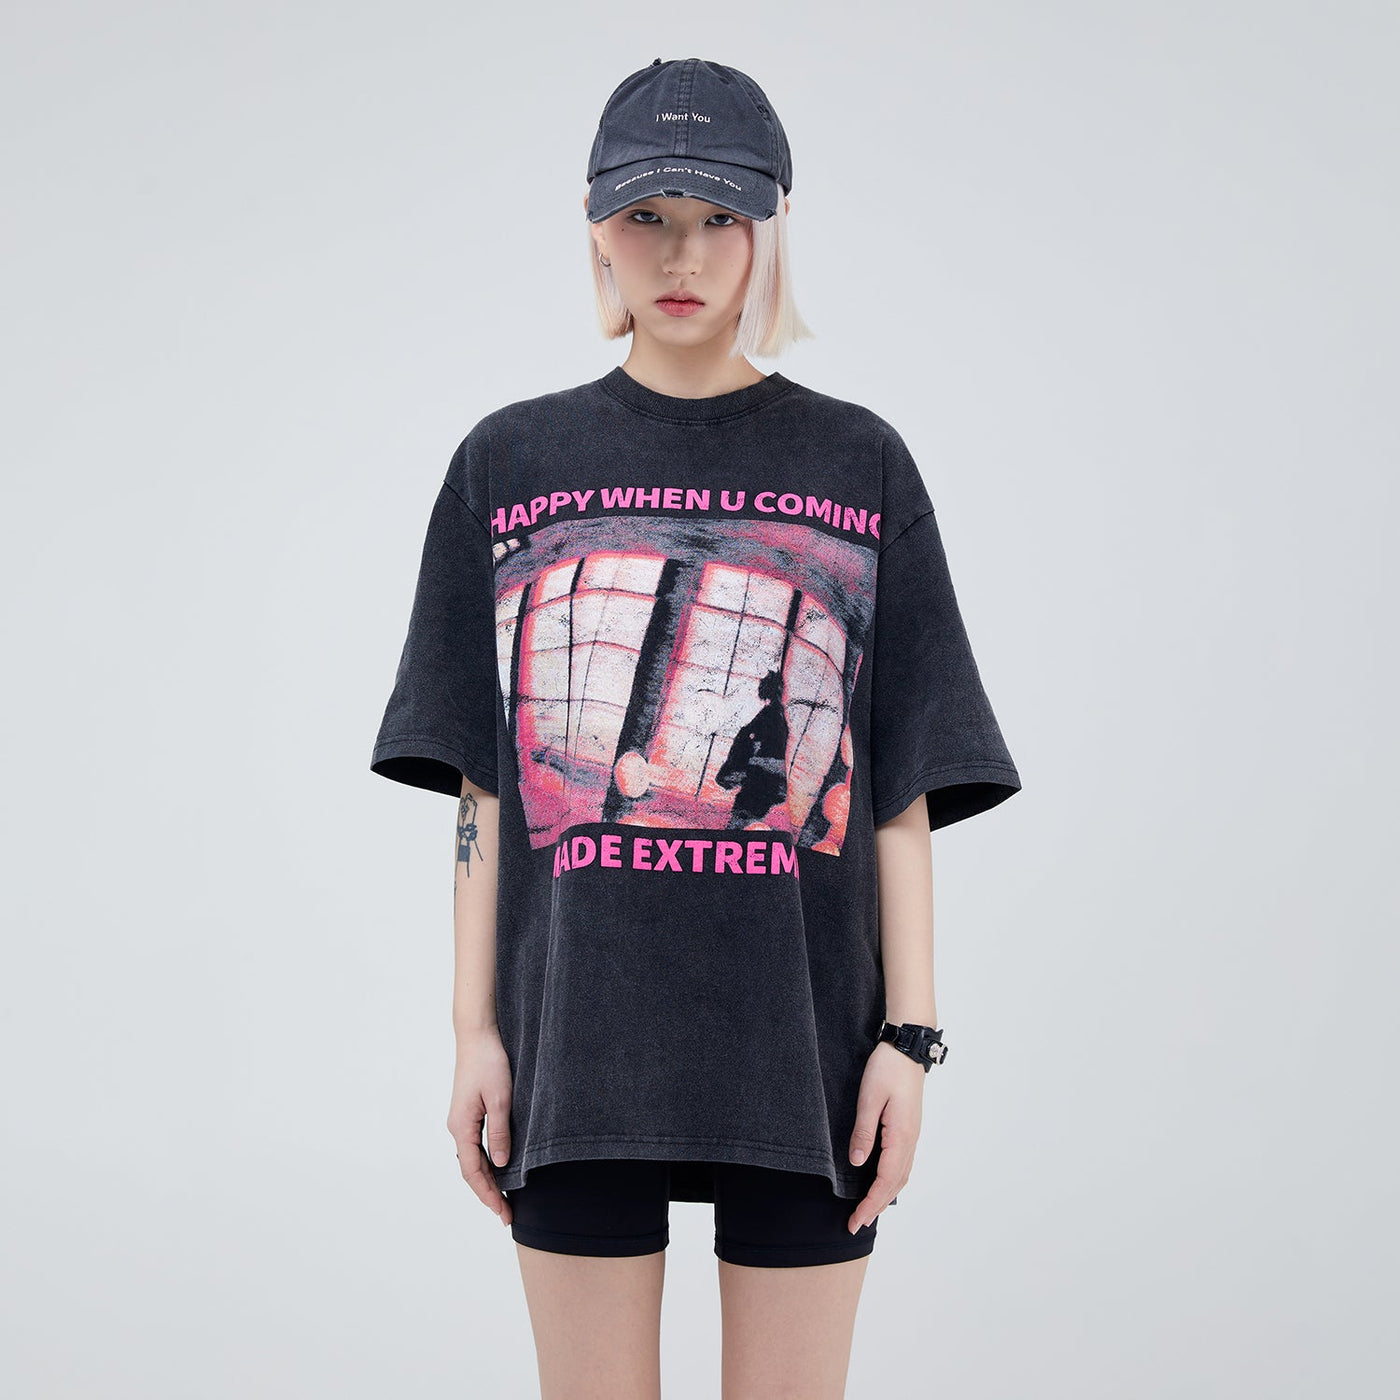 Art Graphic T-Shirt Korean Street Fashion T-Shirt By Made Extreme Shop Online at OH Vault